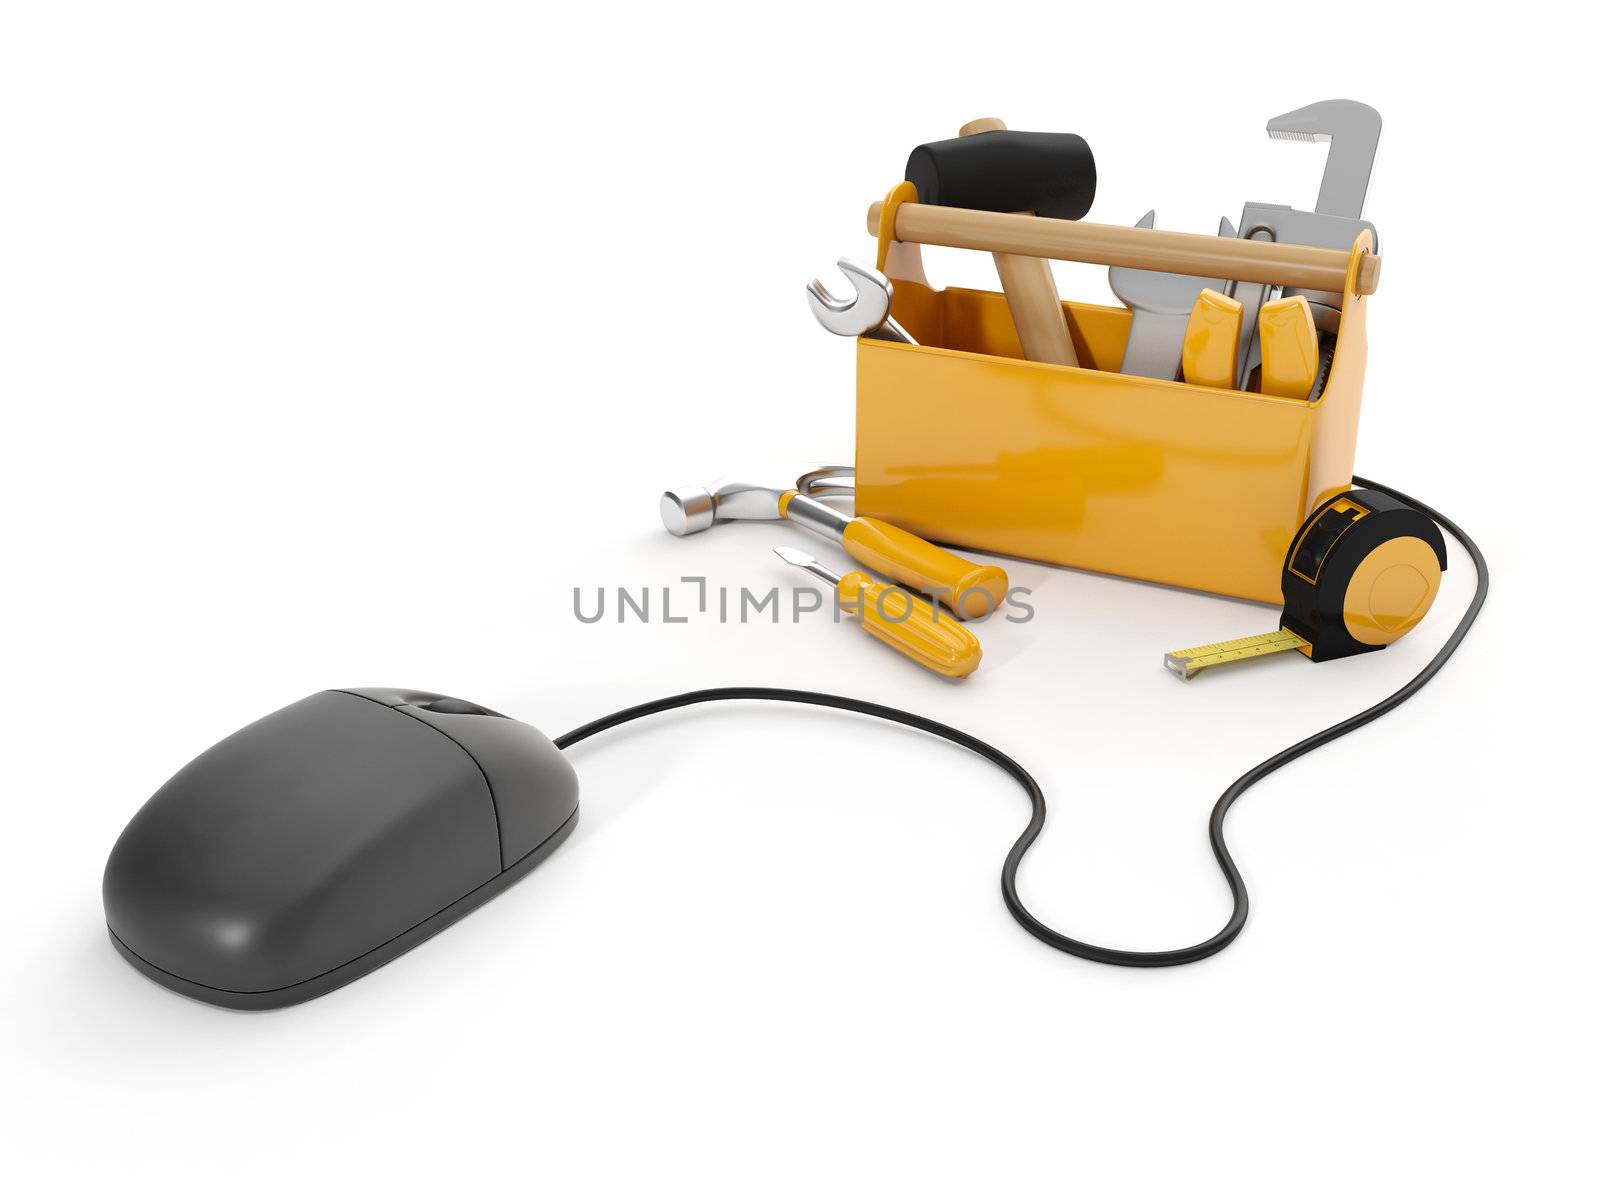 3d illustration: Online tools, technical support. Mouse and a gr by kolobsek